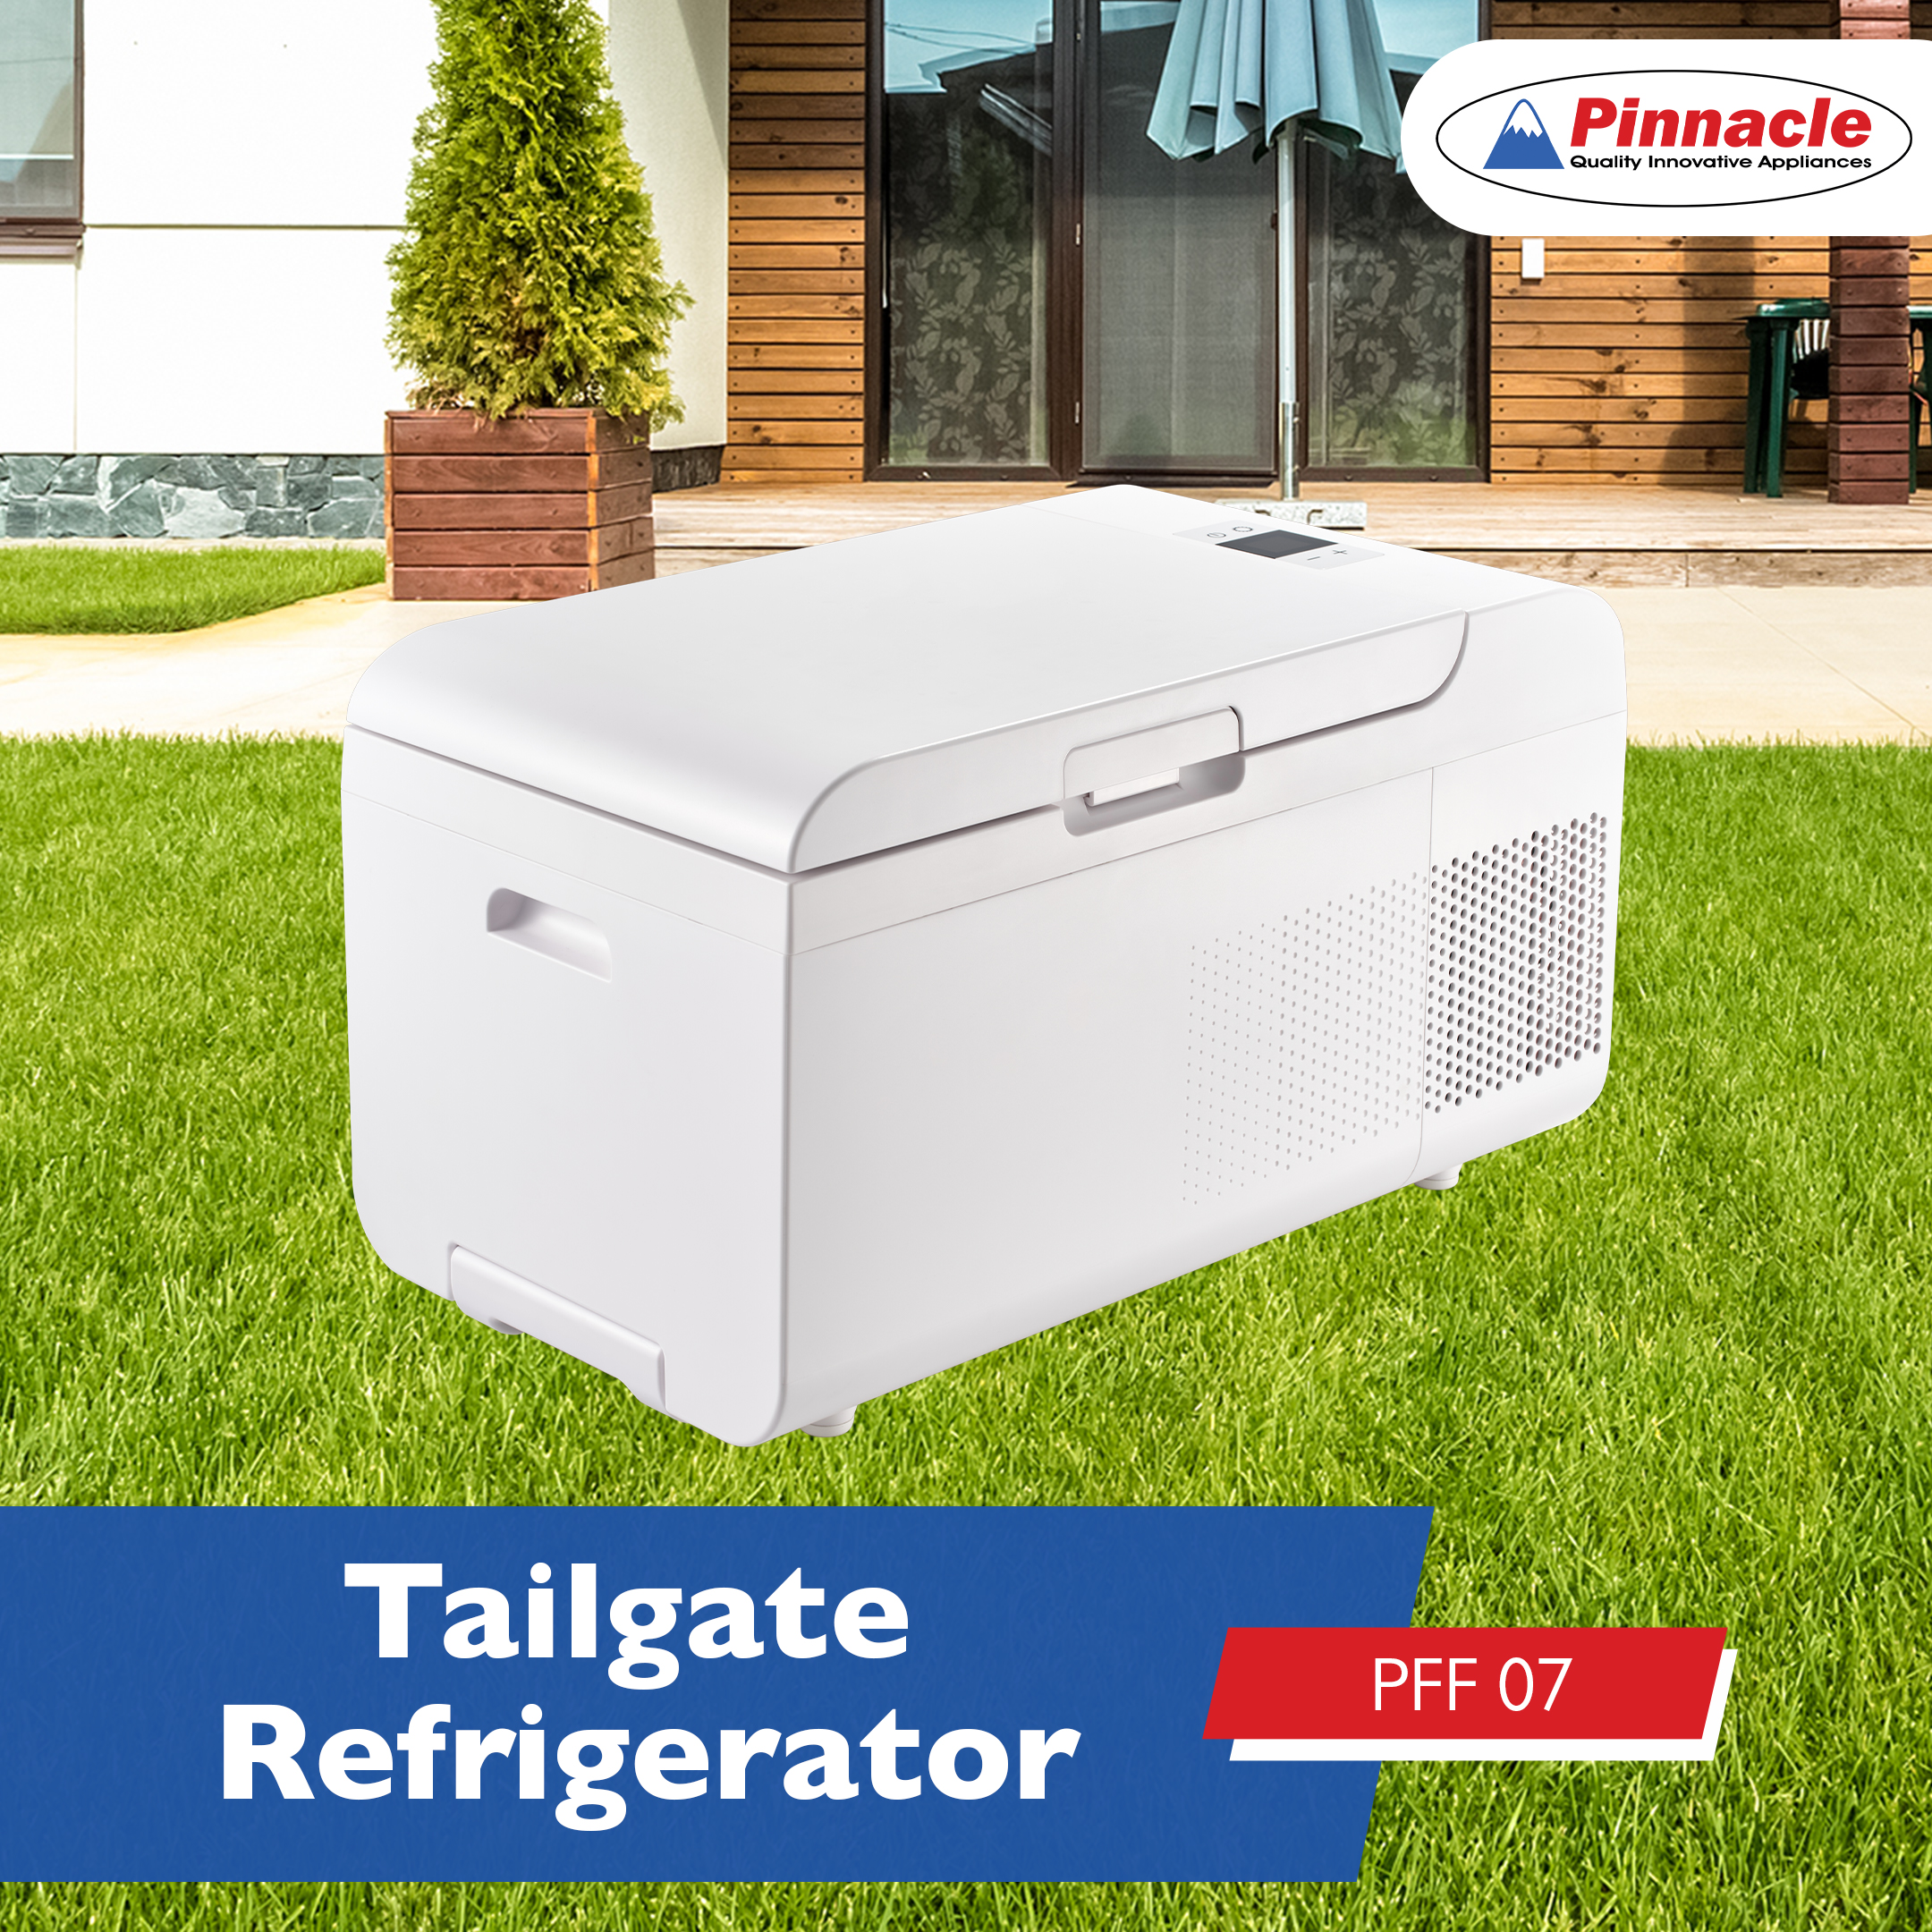 Pinnacle Combos Introduces Its Portable Fridge-Freezer with Compressor Cooling, Eco-Friendly Features, and Advanced Protection Mechanisms